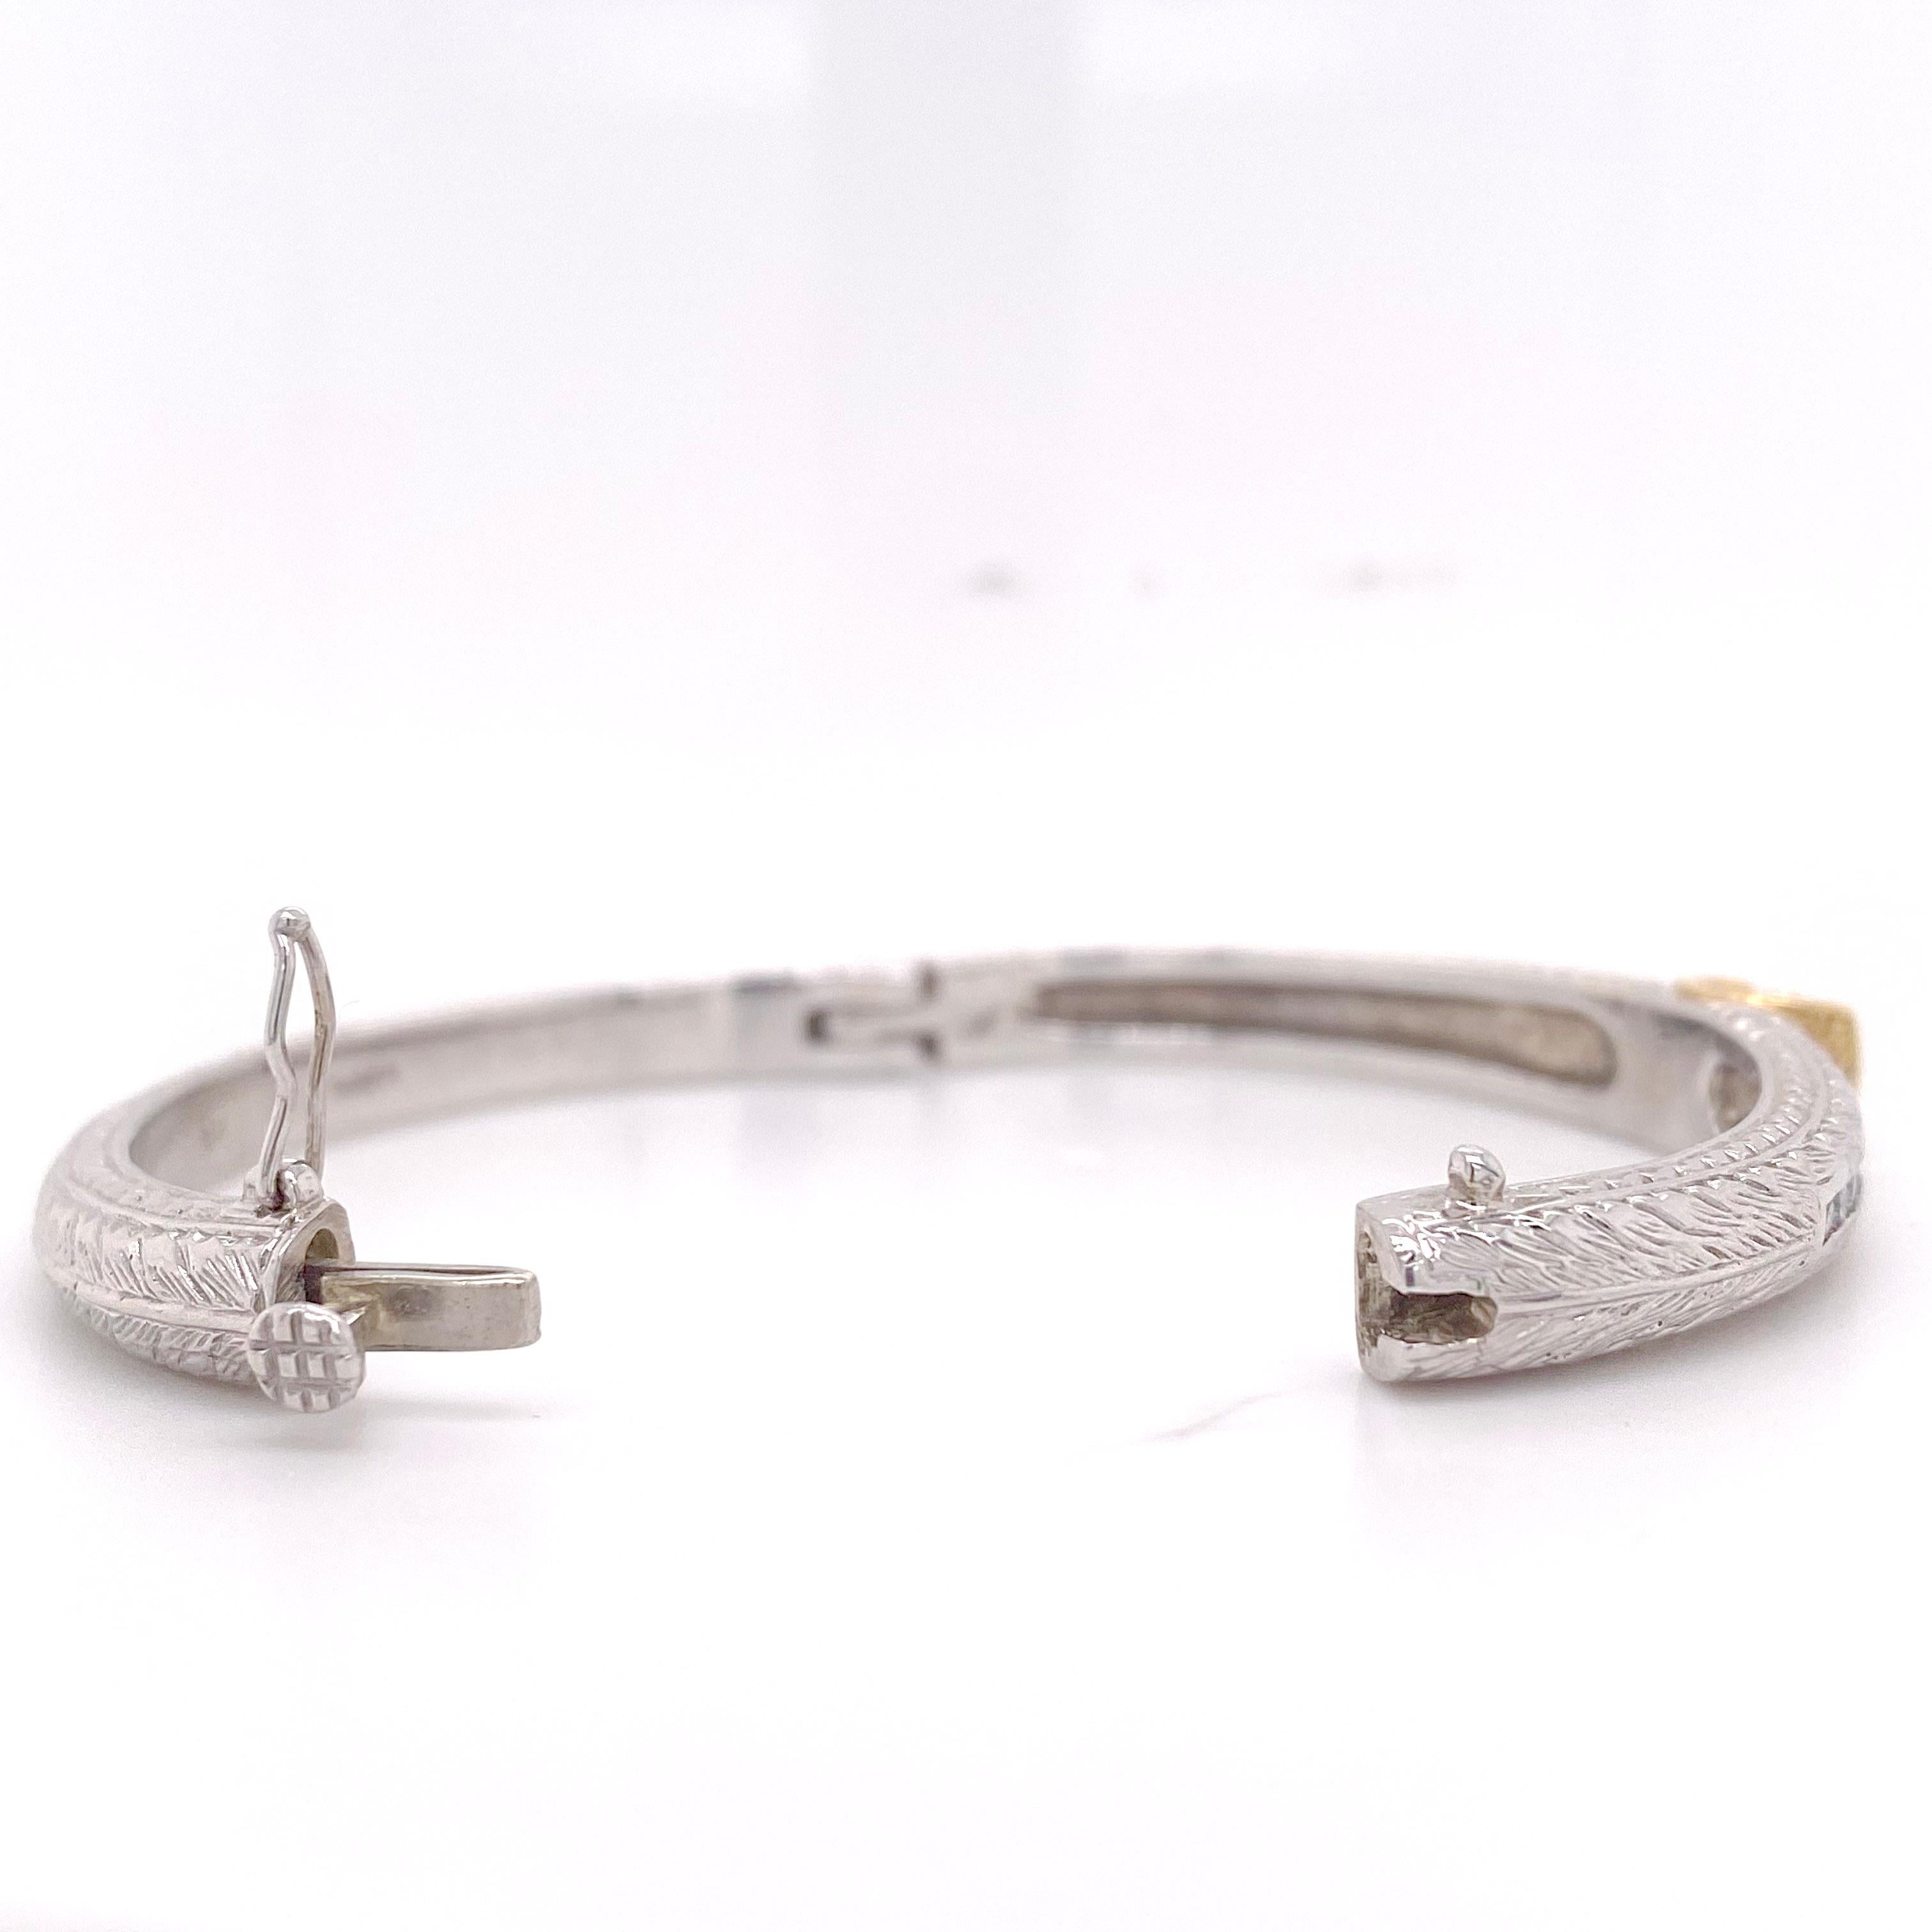 Contemporary Diamond Bangle Bracelet, Mixed Metal 14k Yellow and White Gold w Hand Engraving